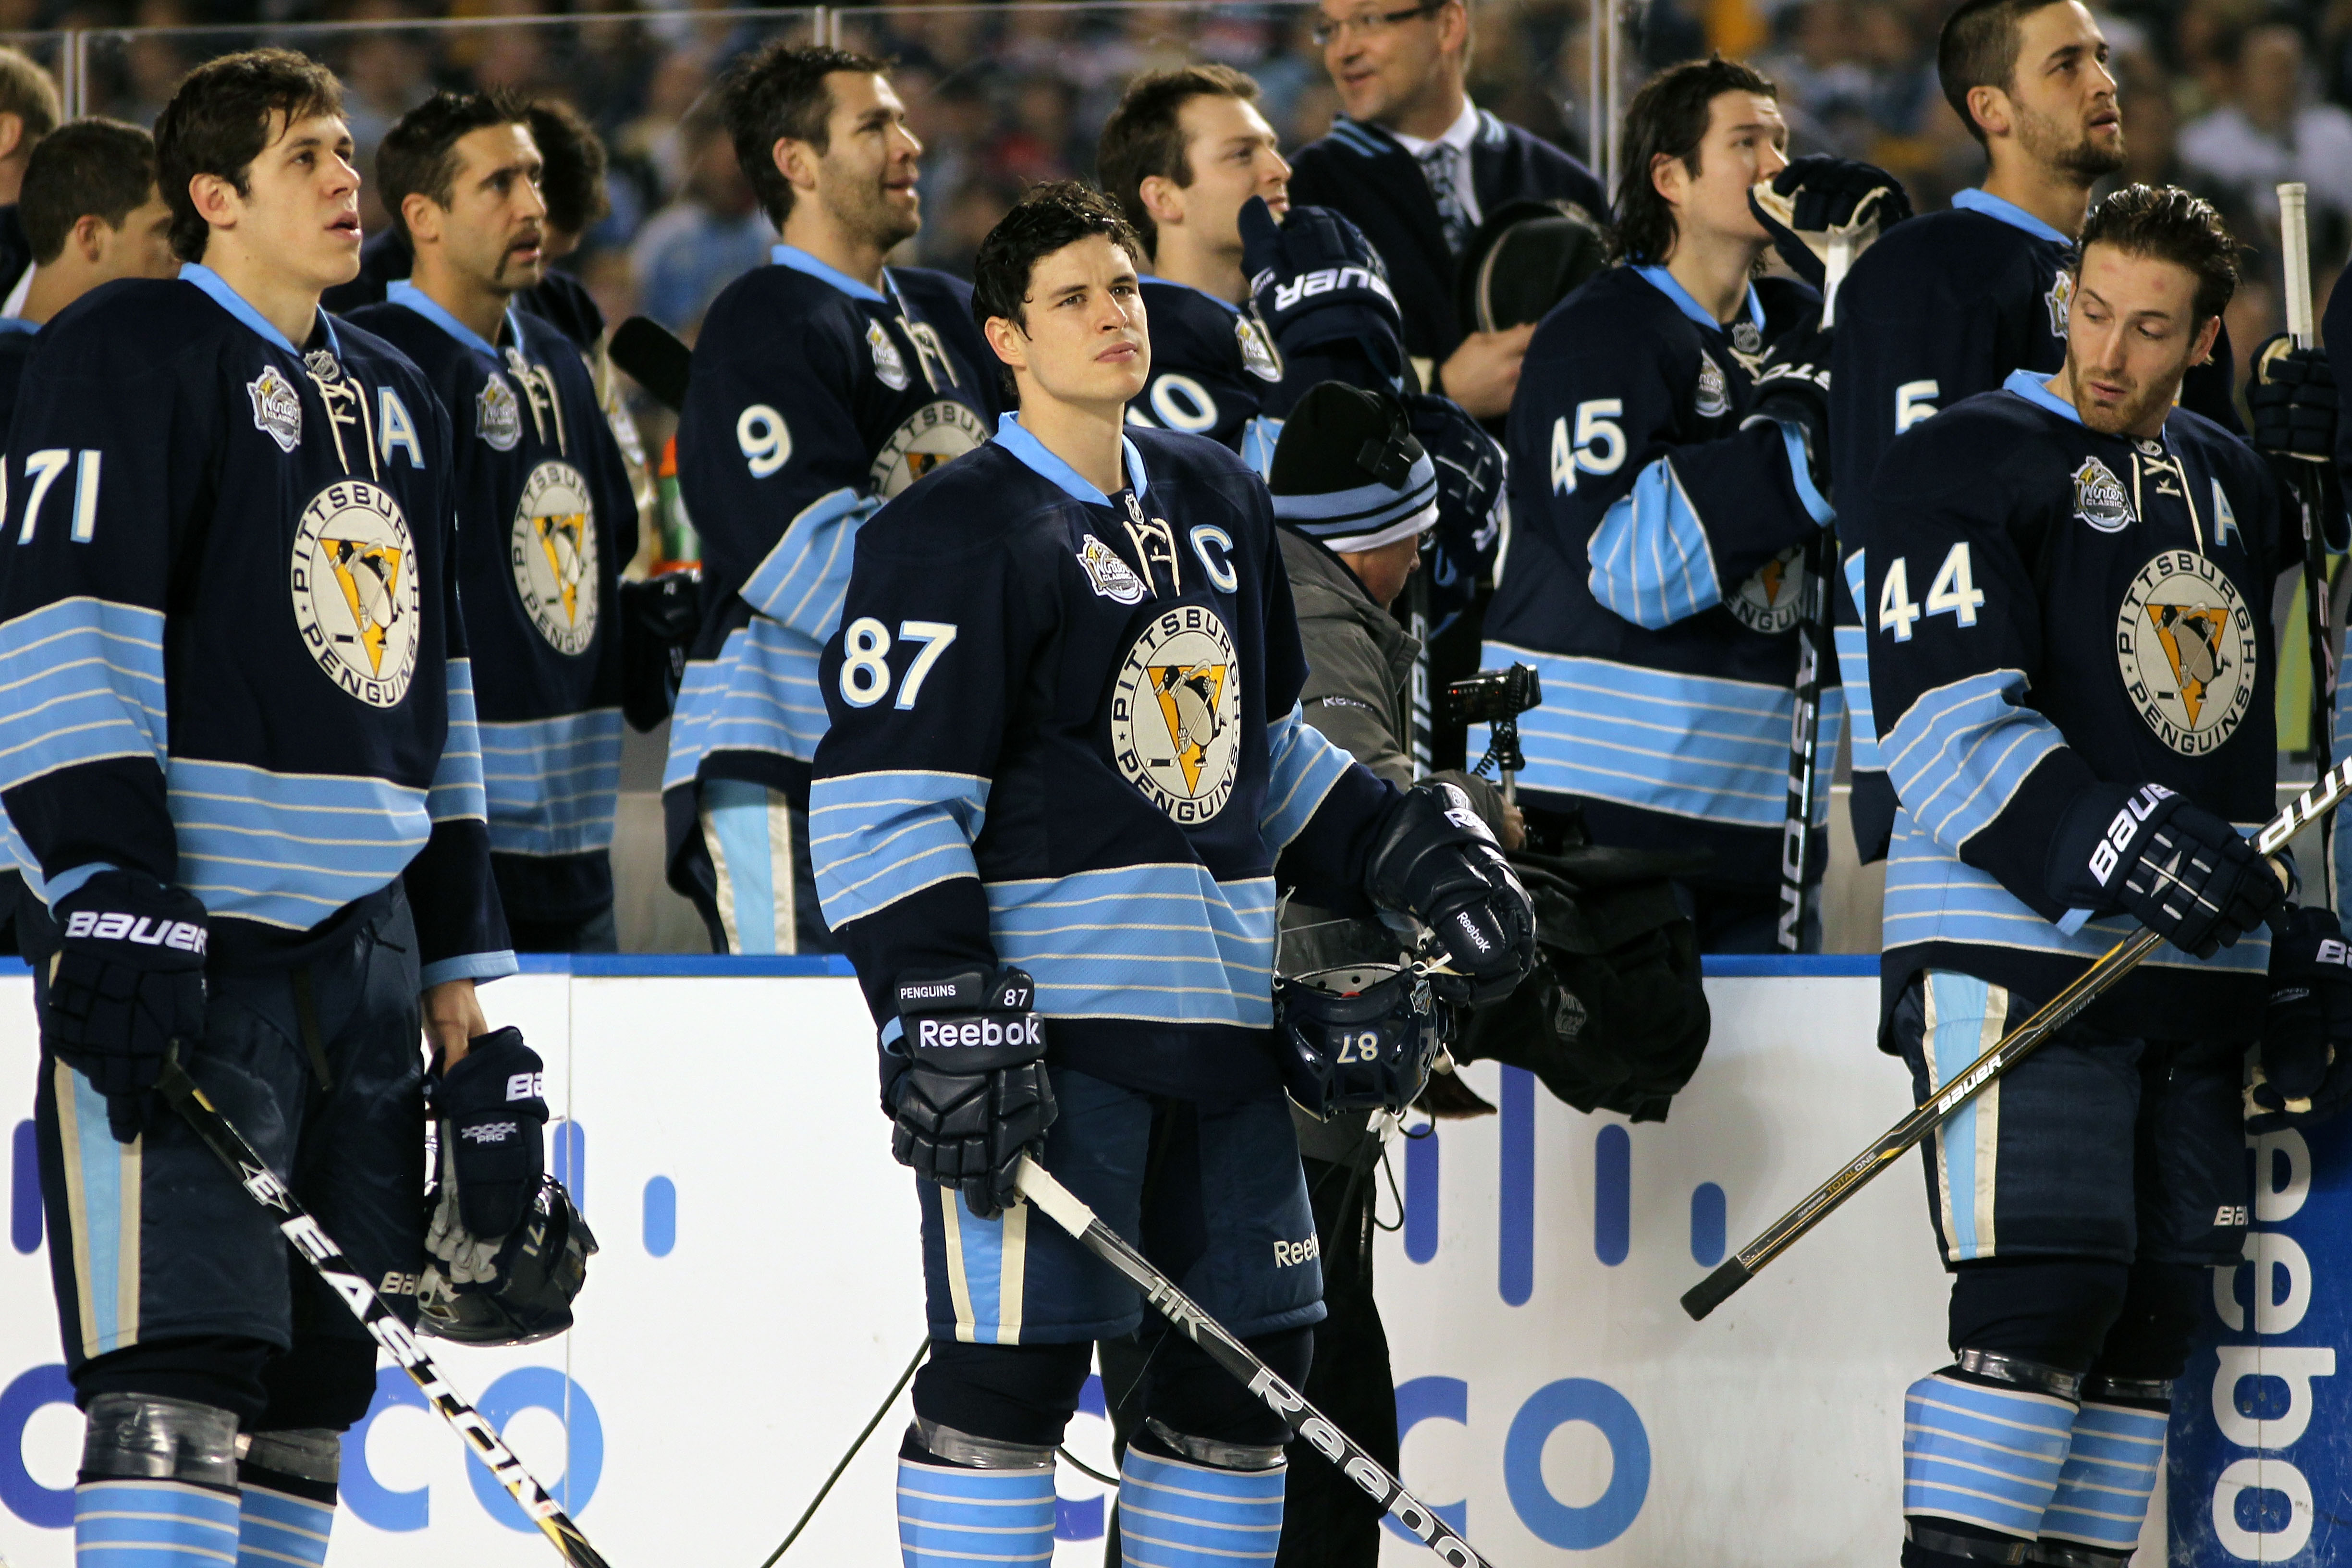 PITTSBURGH, PA - JANUARY 01:  Evgeni Malkin #71, Sidney Crosby #87 and Brooks Orpik #44 of the Pittsburgh Penguins look on during opening ceremonies before the start of the 2011 NHL Bridgestone Winter Classic against the Washington Capitals at Heinz Field